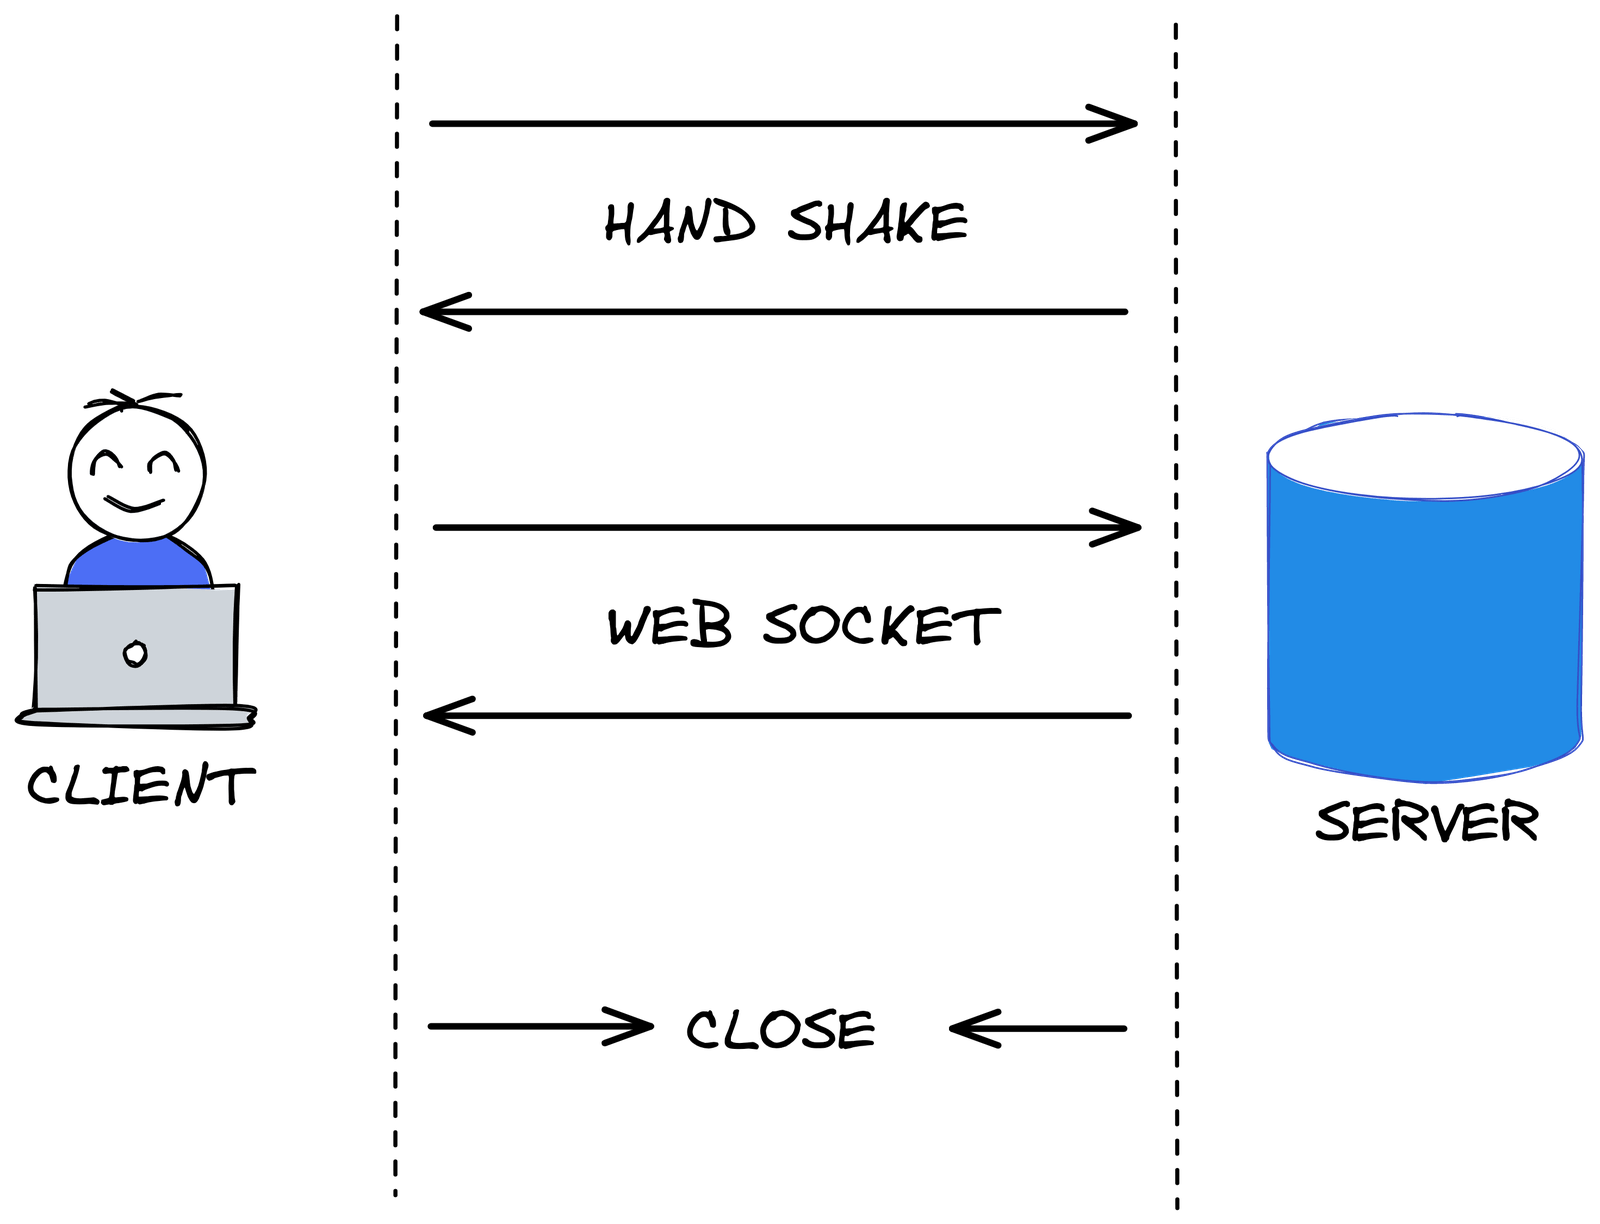 Websockets diagram shows client on one side and server on the other. Mutual handshake, mutual websocket, then either side can close.